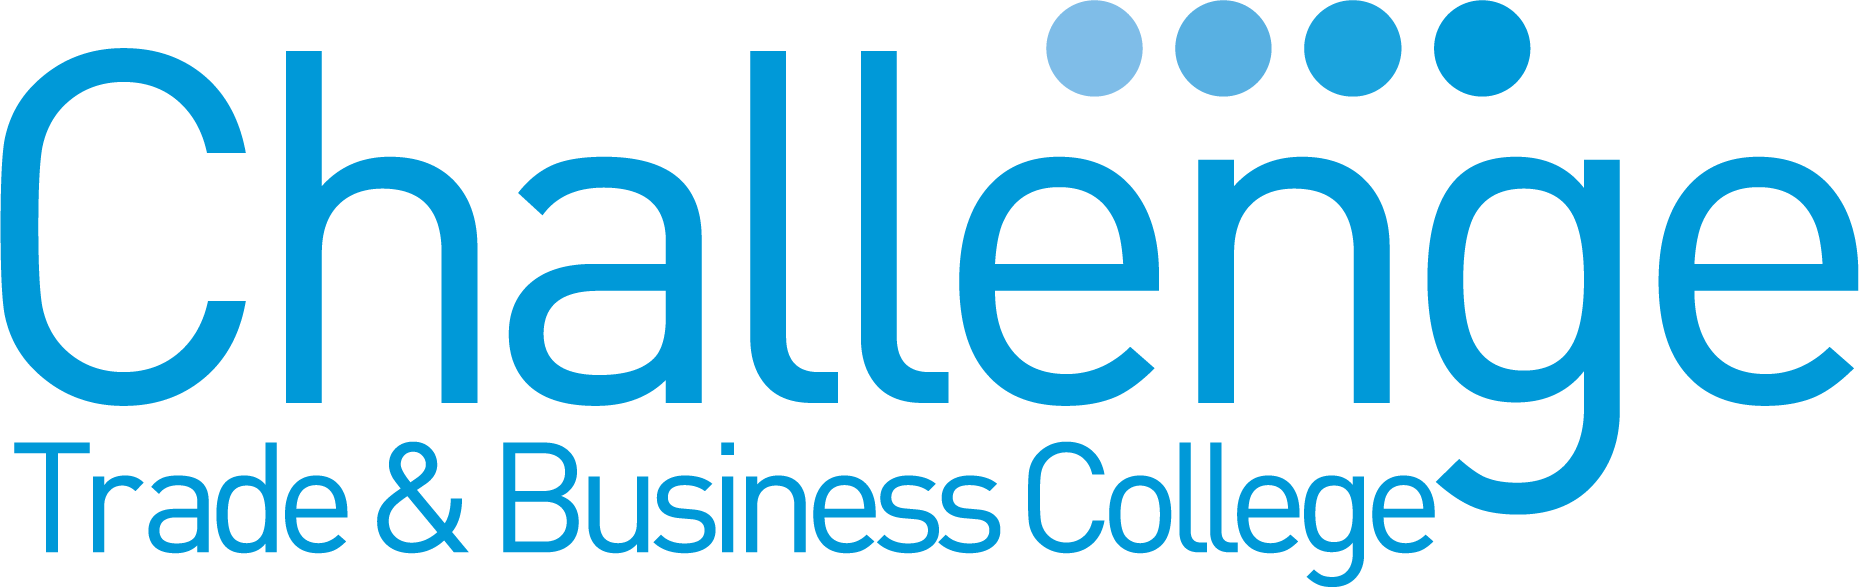 Challenge Trade & Business College